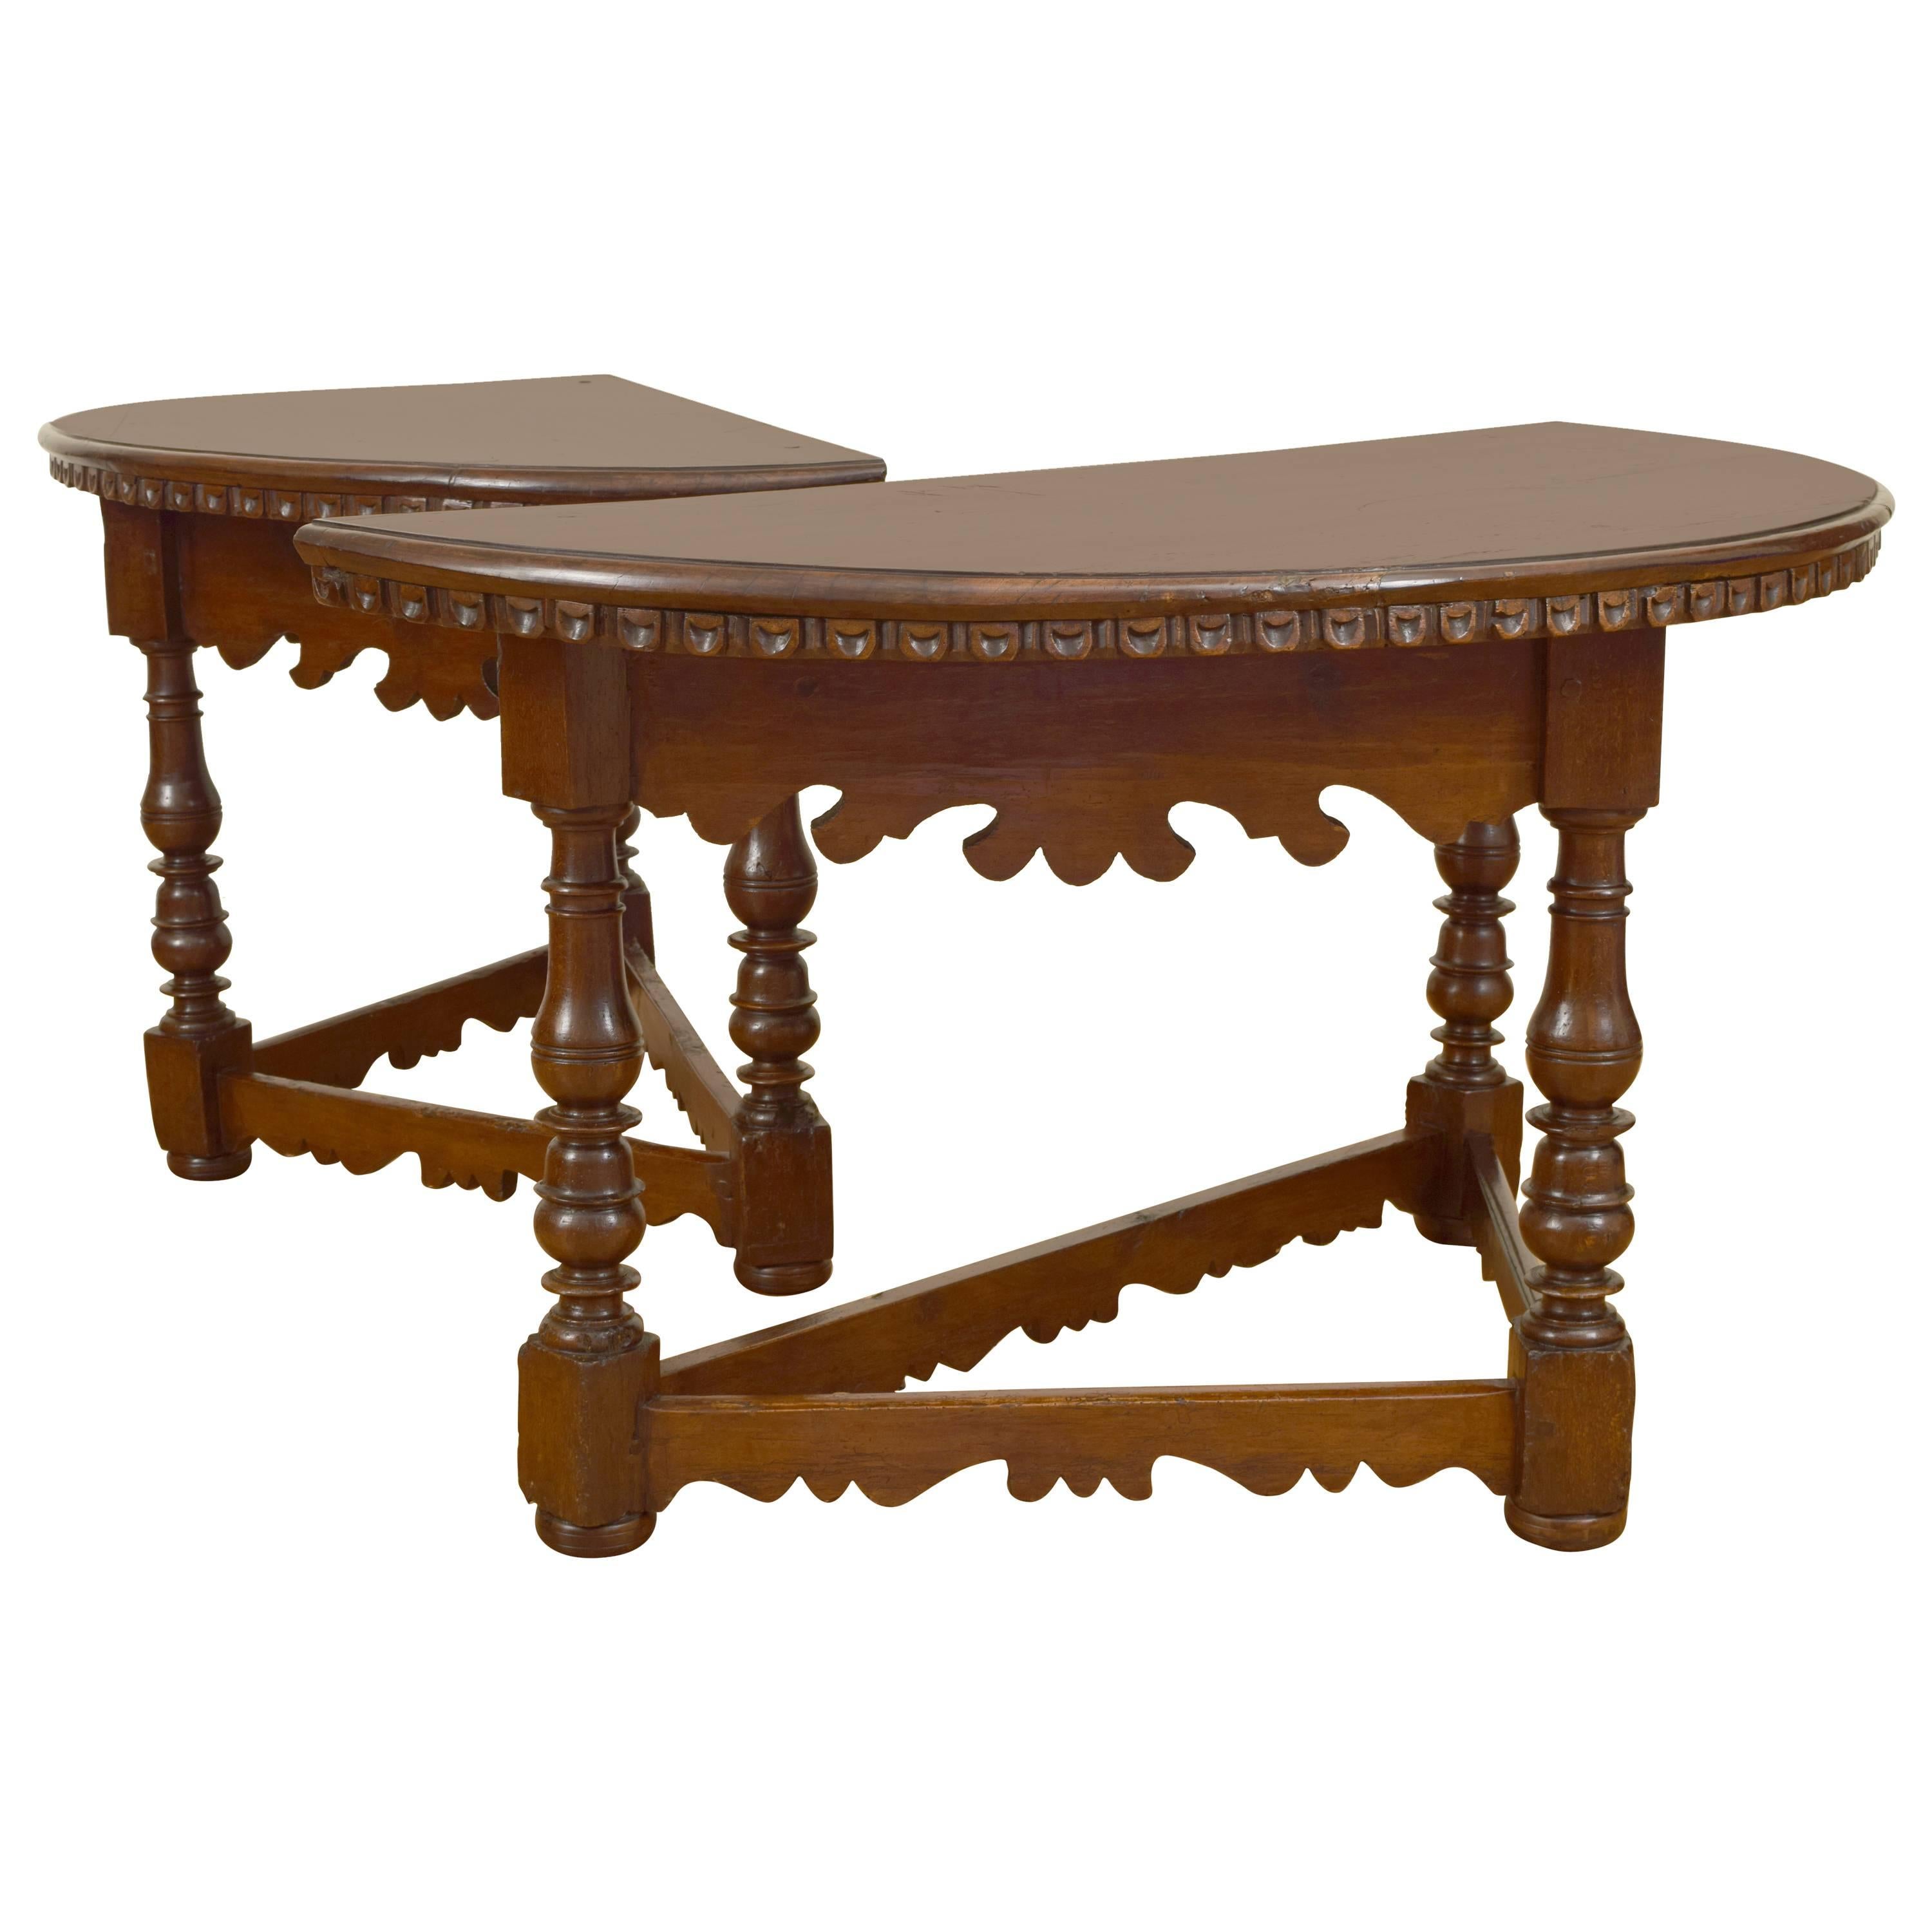 Pair of Italian Baroque Walnut Demilune Console Tables, 18th Century and Later